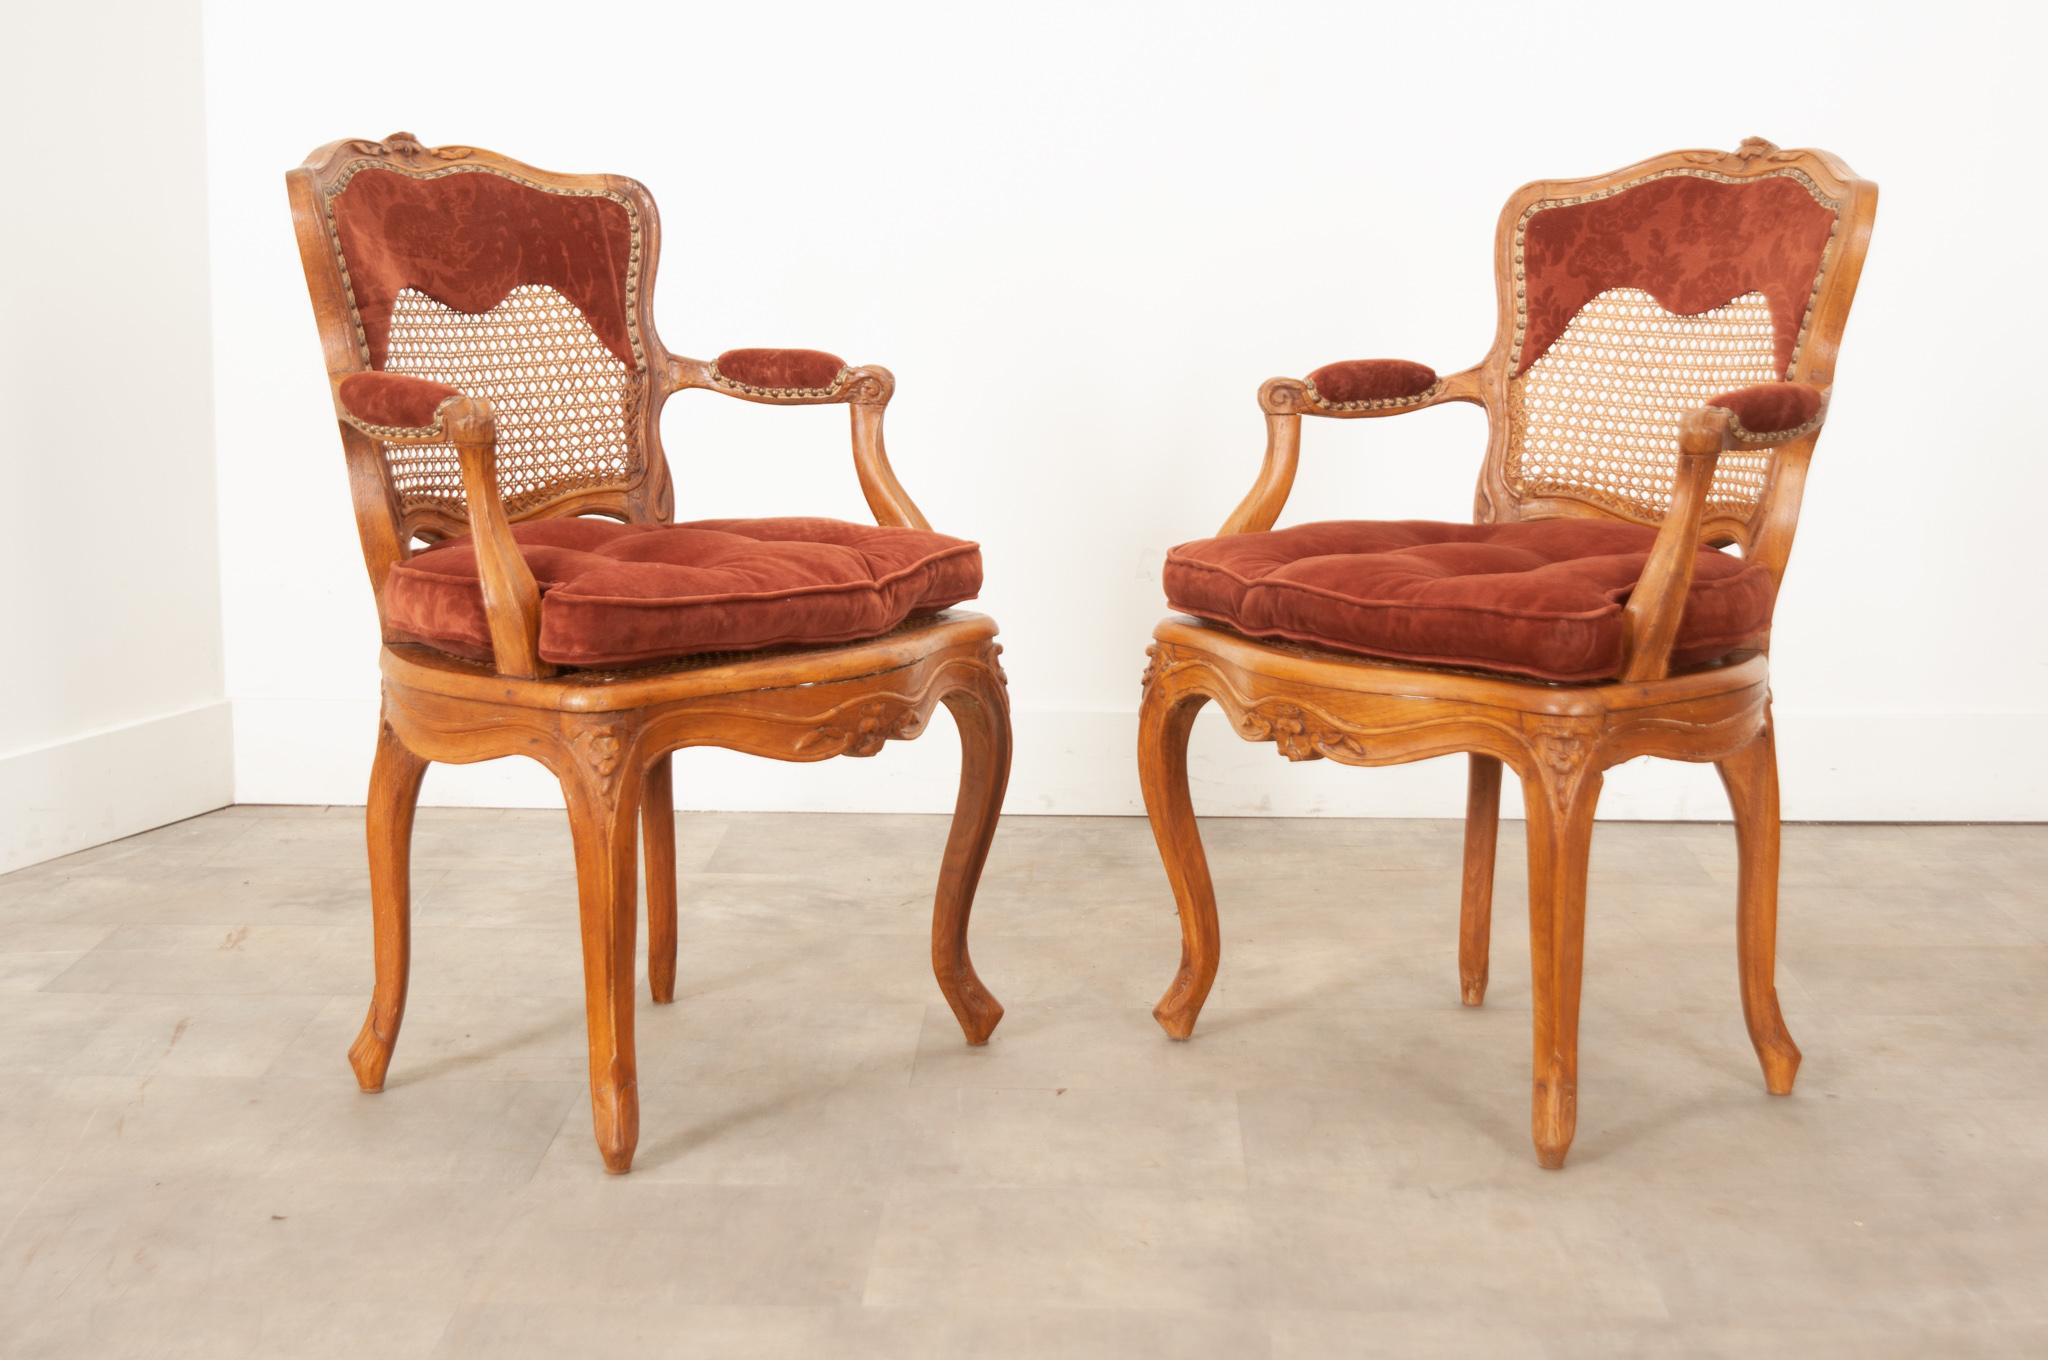 A pair of 18th century Louis XV style oak frame chairs. Upholstered with burgundy velvet fabric, the seat height is 16 ¾” without the cushion and 19 ⅛” with the cushion. The caning is in overall great condition, stained to match the rich oak. There